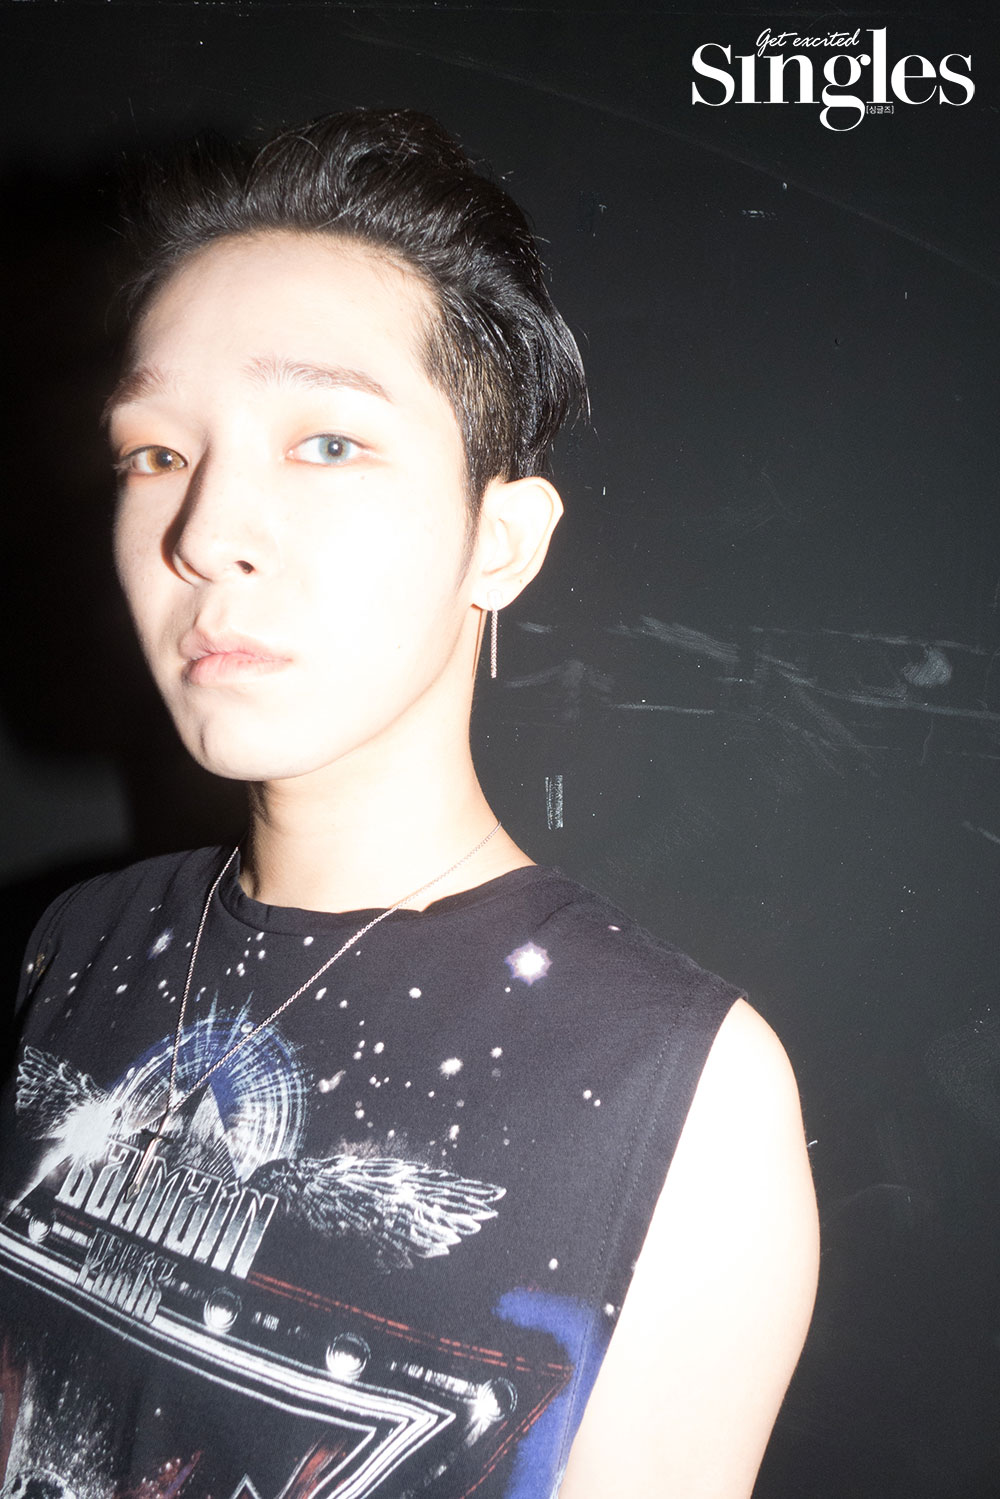 Singles, a delightful fashion magazine for imposing singles, has unveiled a picture of the rough and free charm of the band South KoreaSams Club vocalist Nam Tae-hyun.In this picture, Nam Tae-hyun actively took part in filming pictures by playing music of various genres that fit the shooting atmosphere.It is the back door that has received various poses and expressions in accordance with the music that fills the studio and received praise from the shooting staff.Nam Tae-hyun came by our side with a new album last May.Nam Tae-hyun said, I think I actually worked easier than my first album, because it is full of more experimental music than my first EP.At first, he had to do something by himself, and the burden of his mind was too great to control.I think I was able to concentrate on the album work. Nam Tae-hyun made headlines with street performances after forming the band South KoreaSams Club.I had nothing to lose then, and I had no complicated thoughts, he said of the street performance.Now, thankfully, the label has a support group, and the schedule of unexpected broadcasting activities is getting a little bit more than the performance.I am trying very hard to inform the public of the band. He expressed his affection for South Korea Sams Club.He participates in writing, composing, and producing as well as visual directing. Its very difficult and sensitive in every way.Its easy to do anything yourself, because what you want is clearly set in your head, so you jump into a lot of things yourself.I like to do what I like, what I want to do, and what I do not want to lose in music than the popular genre. The 25-year-old Nam Tae-hyuns pictures and interviews with unique style and impressive music colors can be found in the September issue of Singles and the fun online playground Singles mobile.Photo: Singles